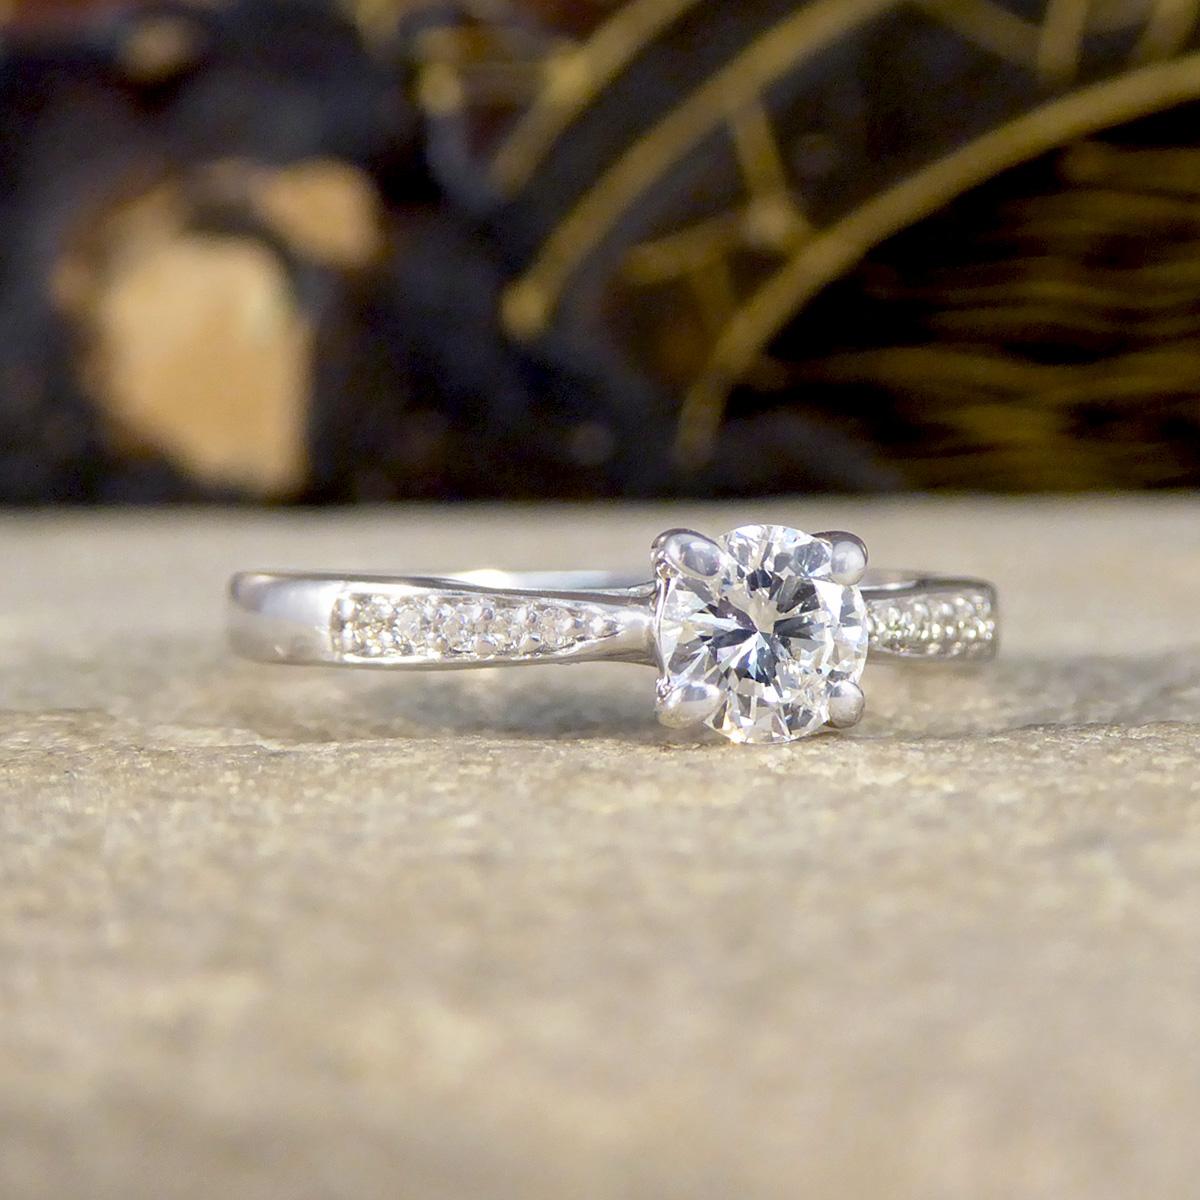 This classic Diamond solitaire ring is the epitome of timeless elegance and sophisticated charm and would make the perfect engagement ring. Crafted from 18ct white gold, it features a stunning 0.40ct diamond at its heart, securely held in a four